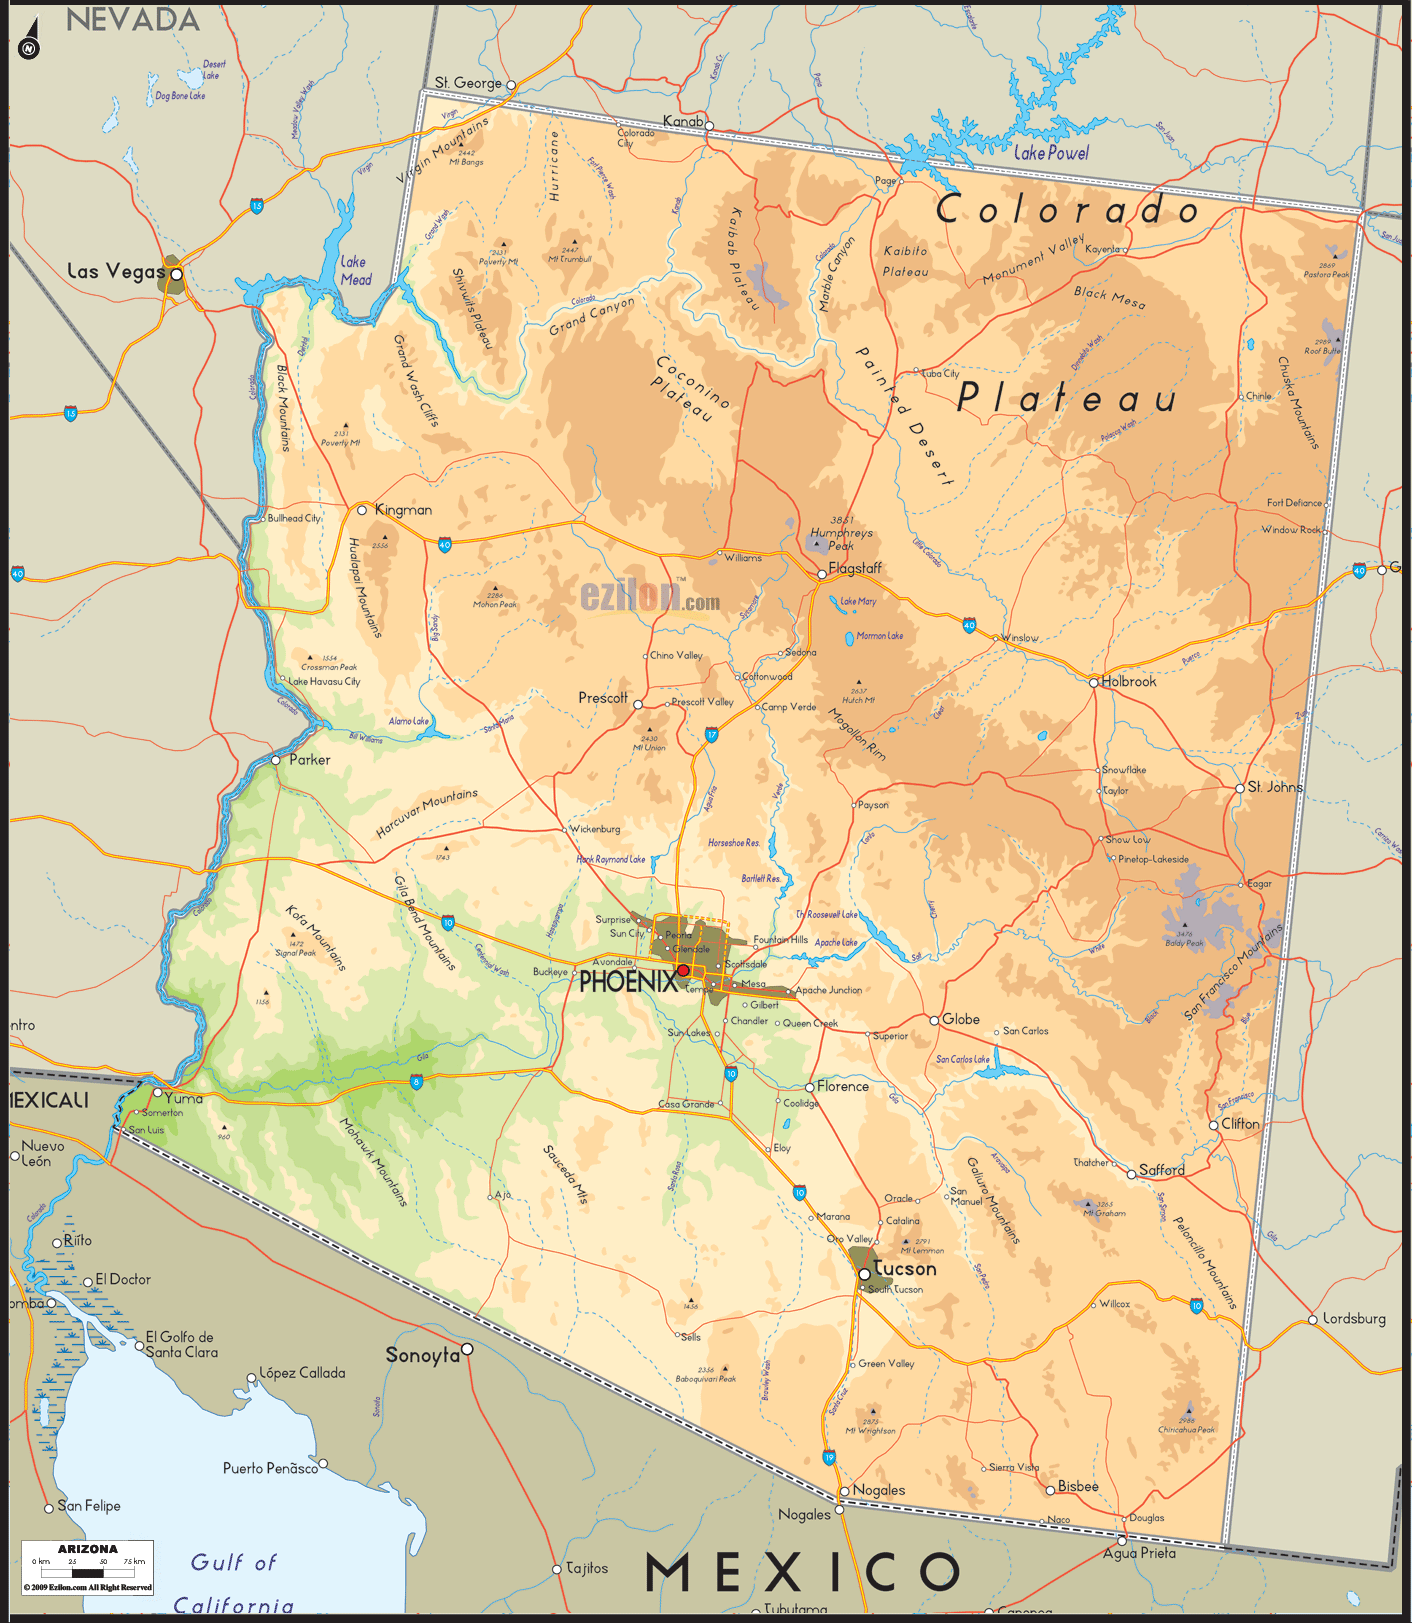 Physical map of Arizona showing major geographical features such as rivers, lakes, topography and land formations.